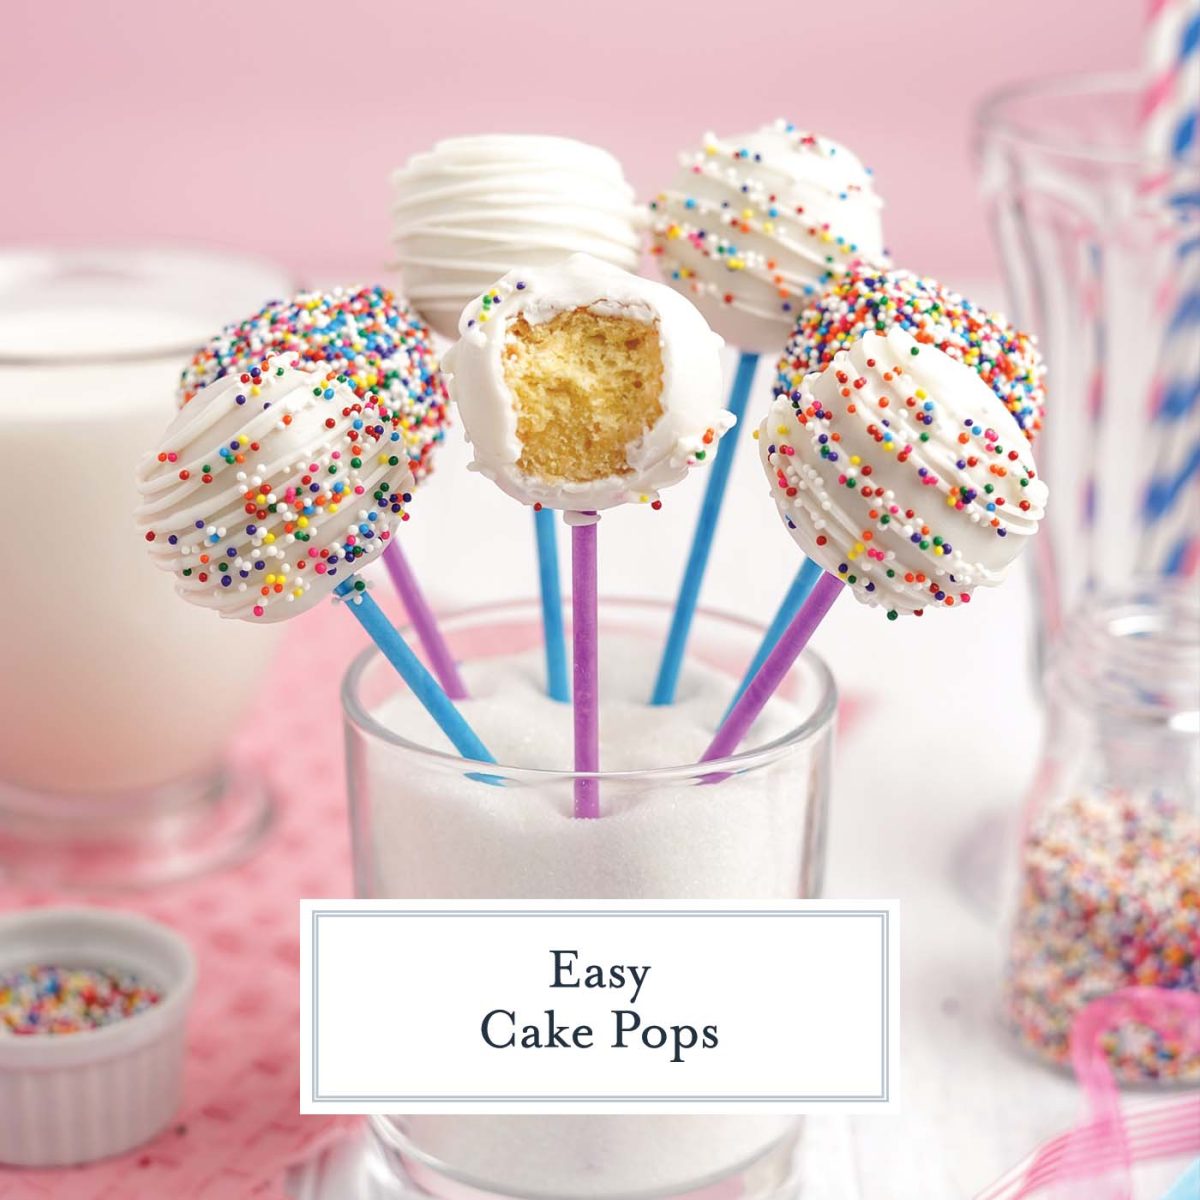 How to Make Cake Pops (Step by Step)